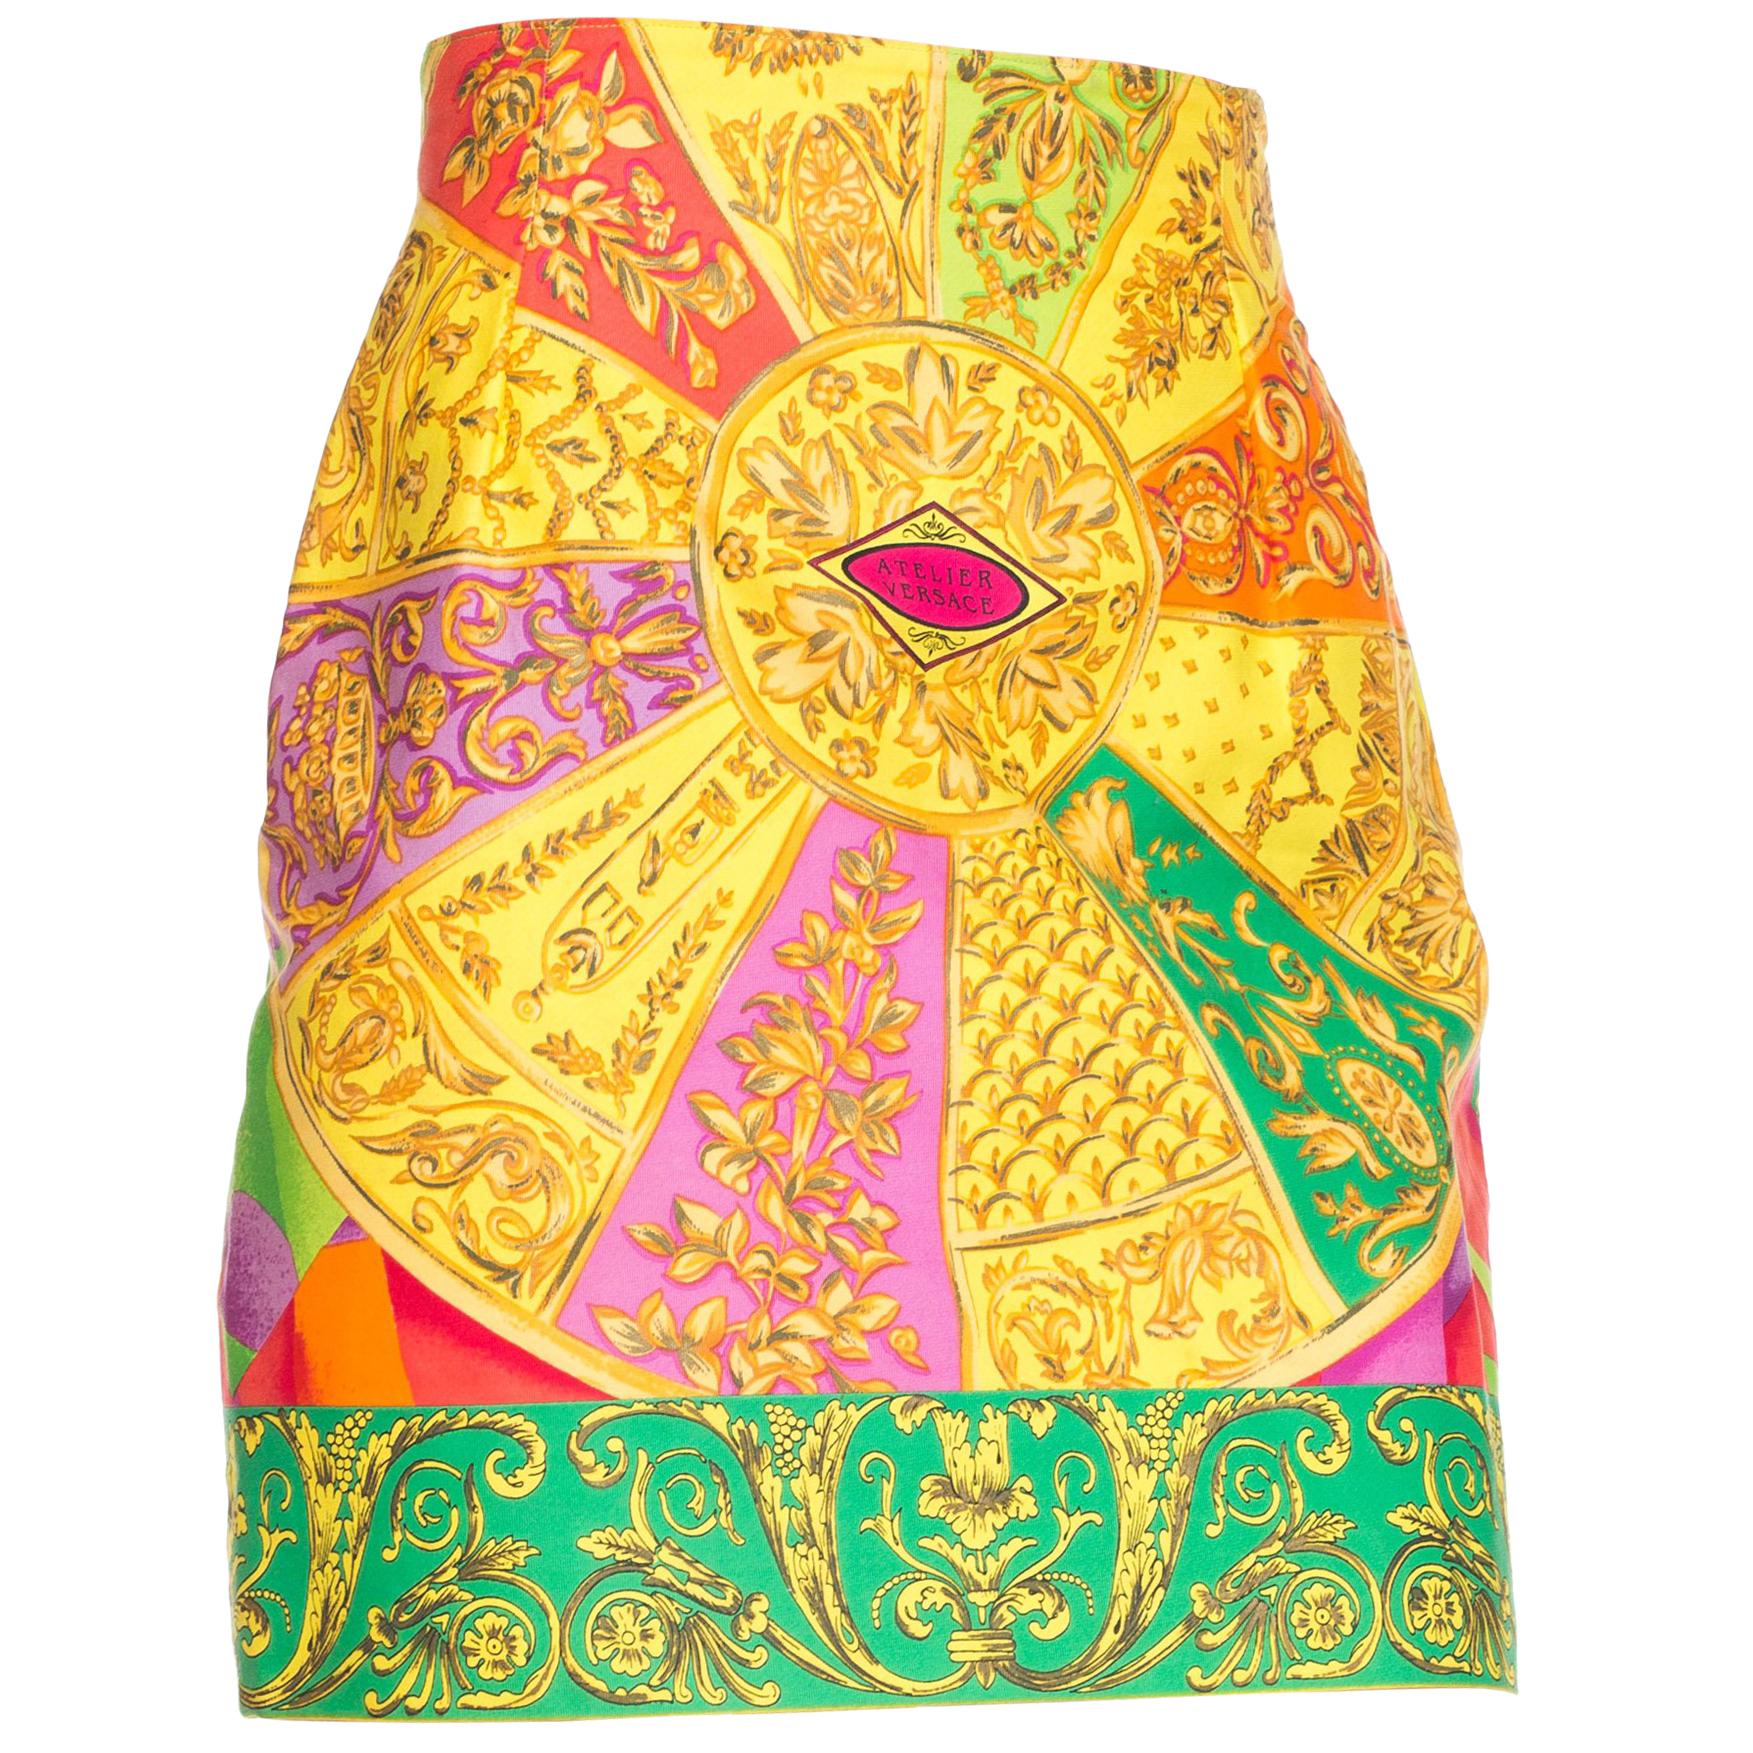 1990S GIANNI VERSACE Bright Multicolor Cotton Baroque Printed High-Waisted Mini